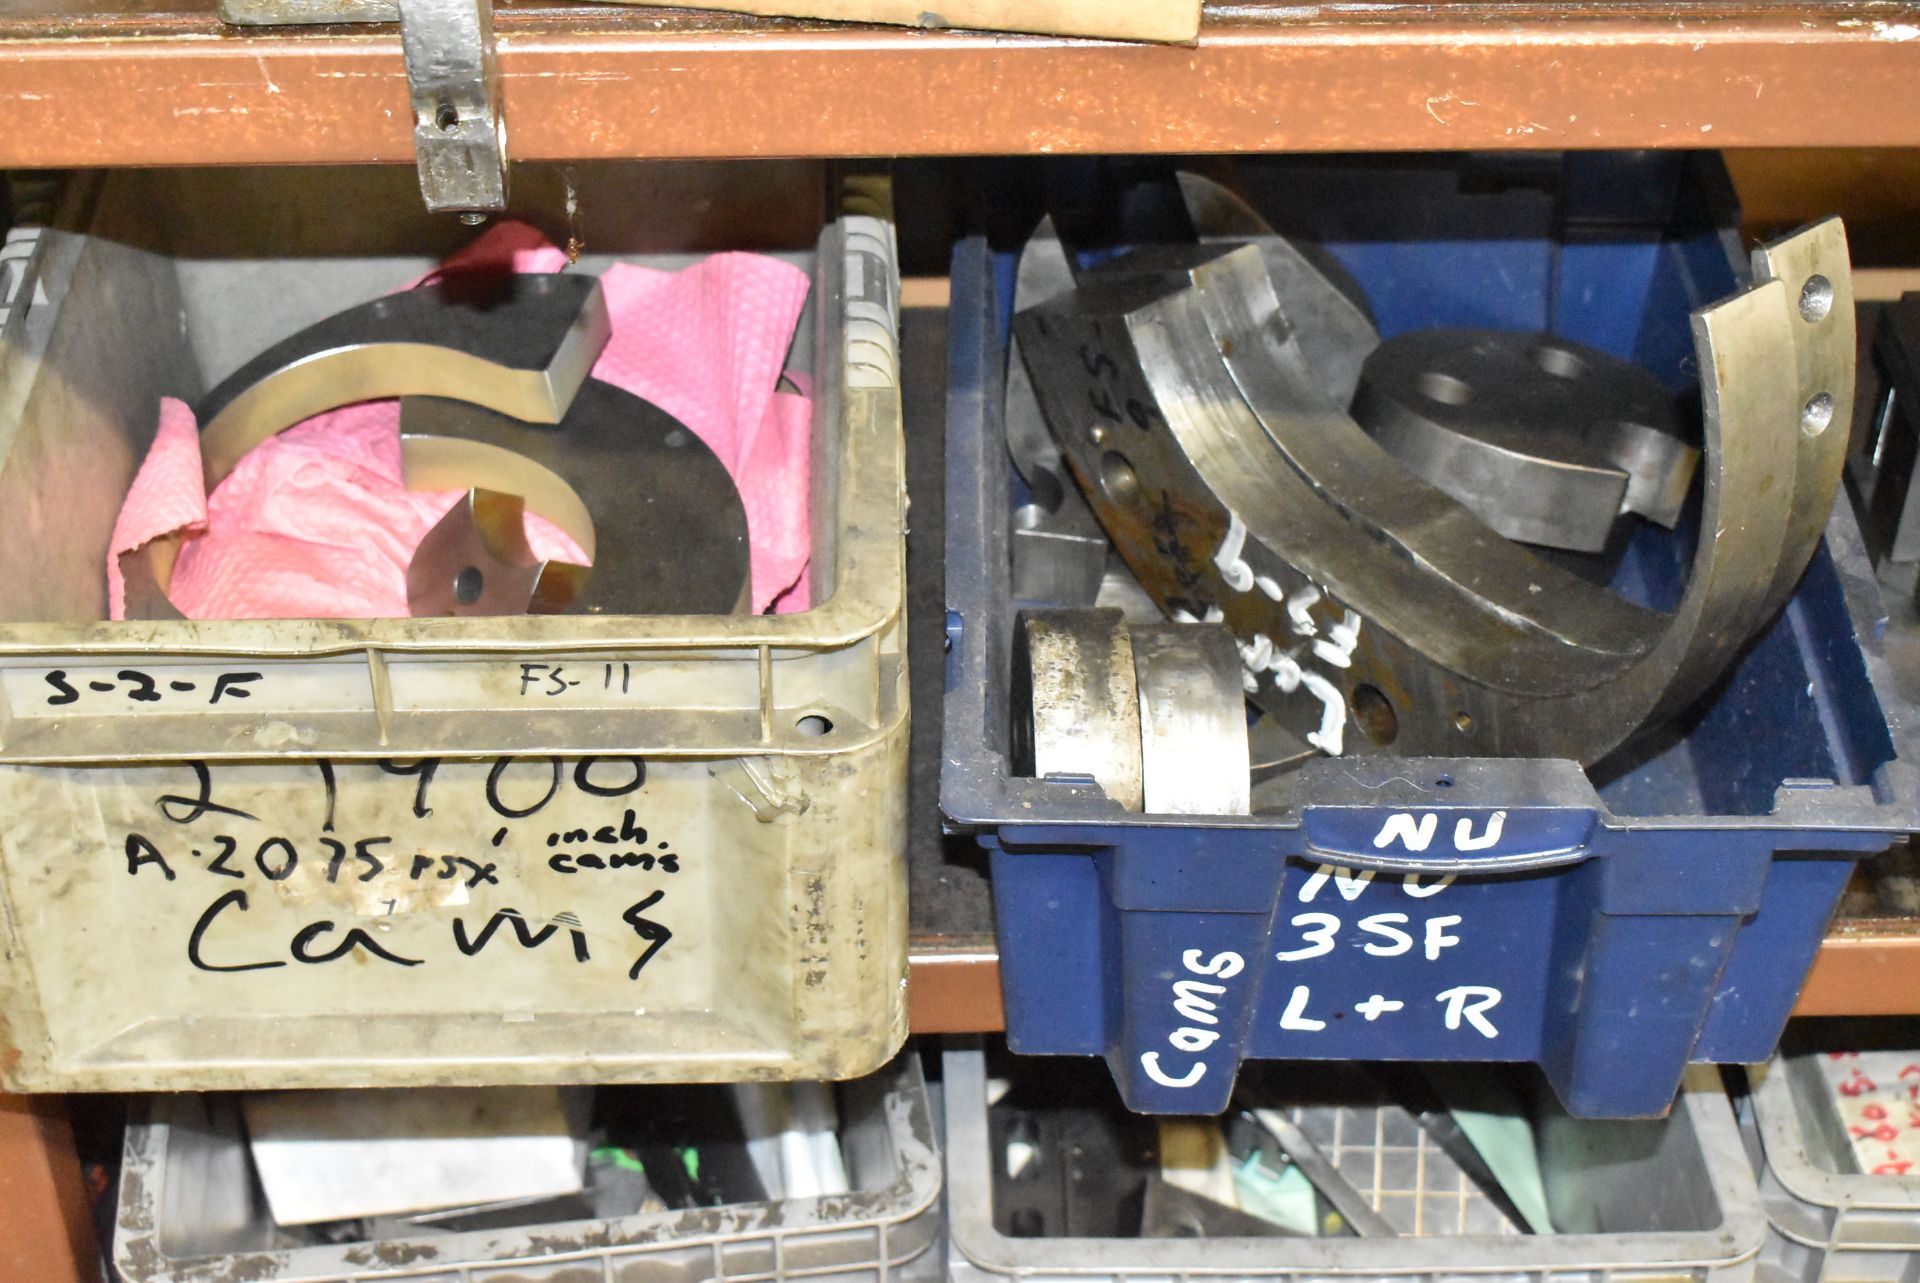 LOT/ CONTENTS OF SHELF - FOUR SLIDE DIE SETS, CUTTER HEADS & TOOLING - Image 5 of 5